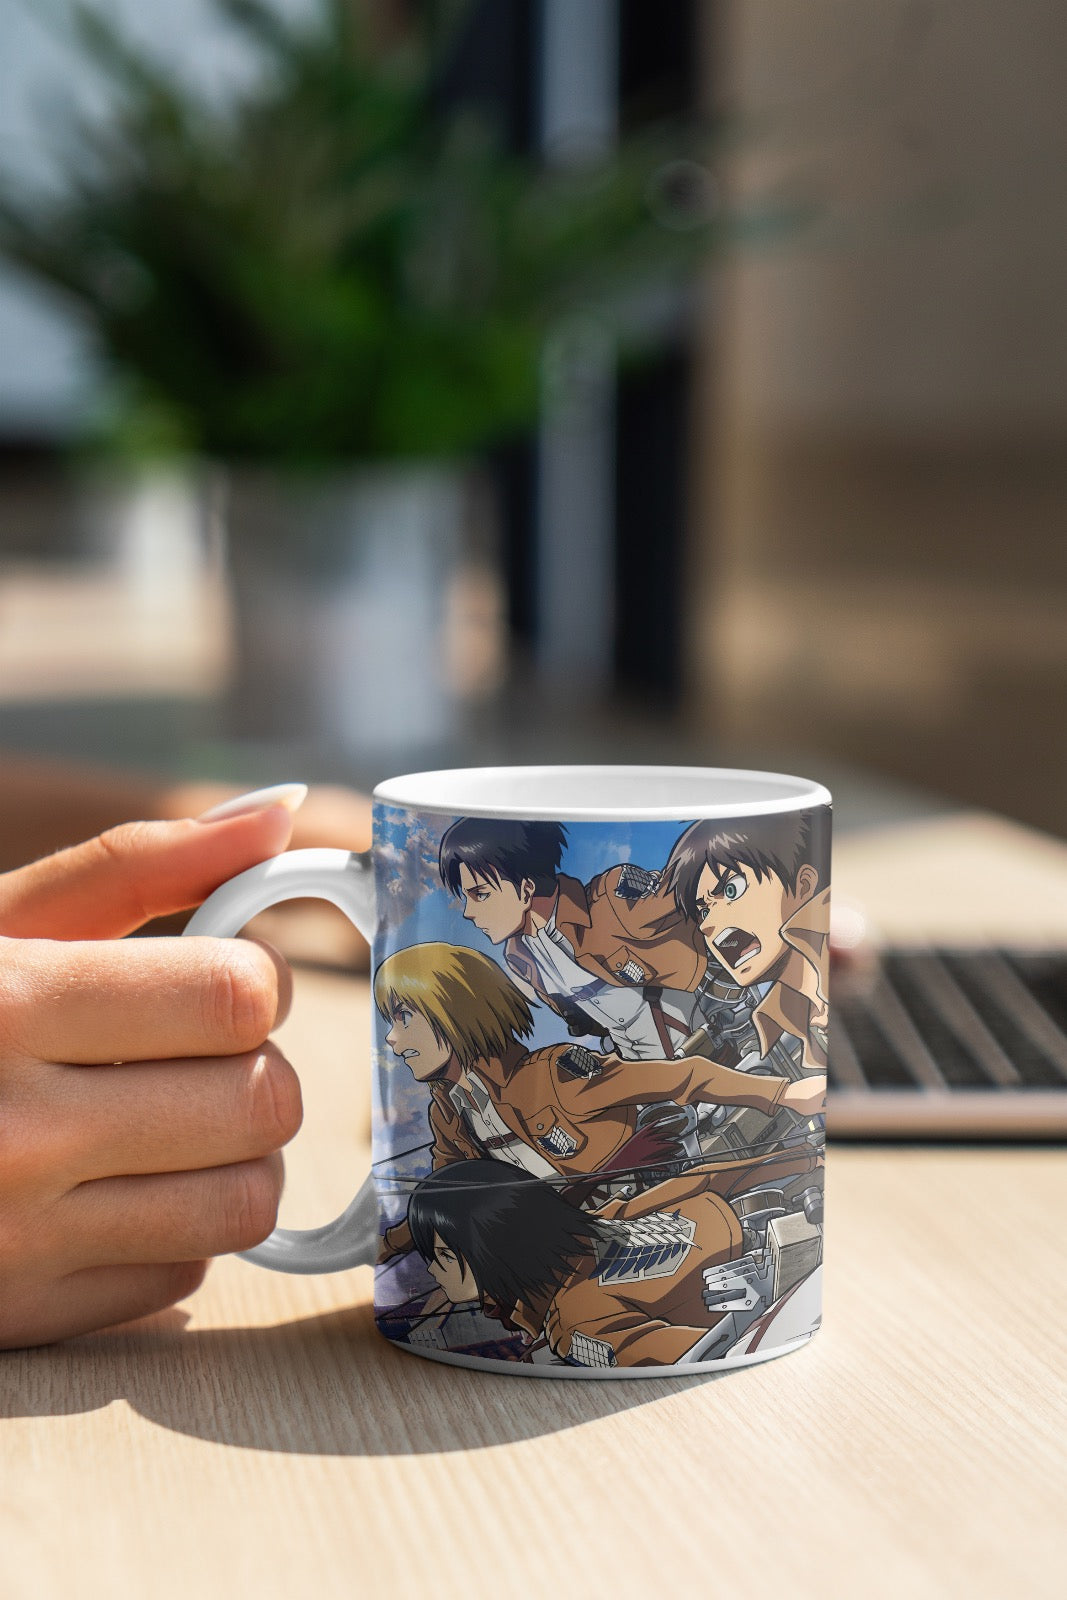 What do you think of anime cups? - Chit Chat - Anime Forums